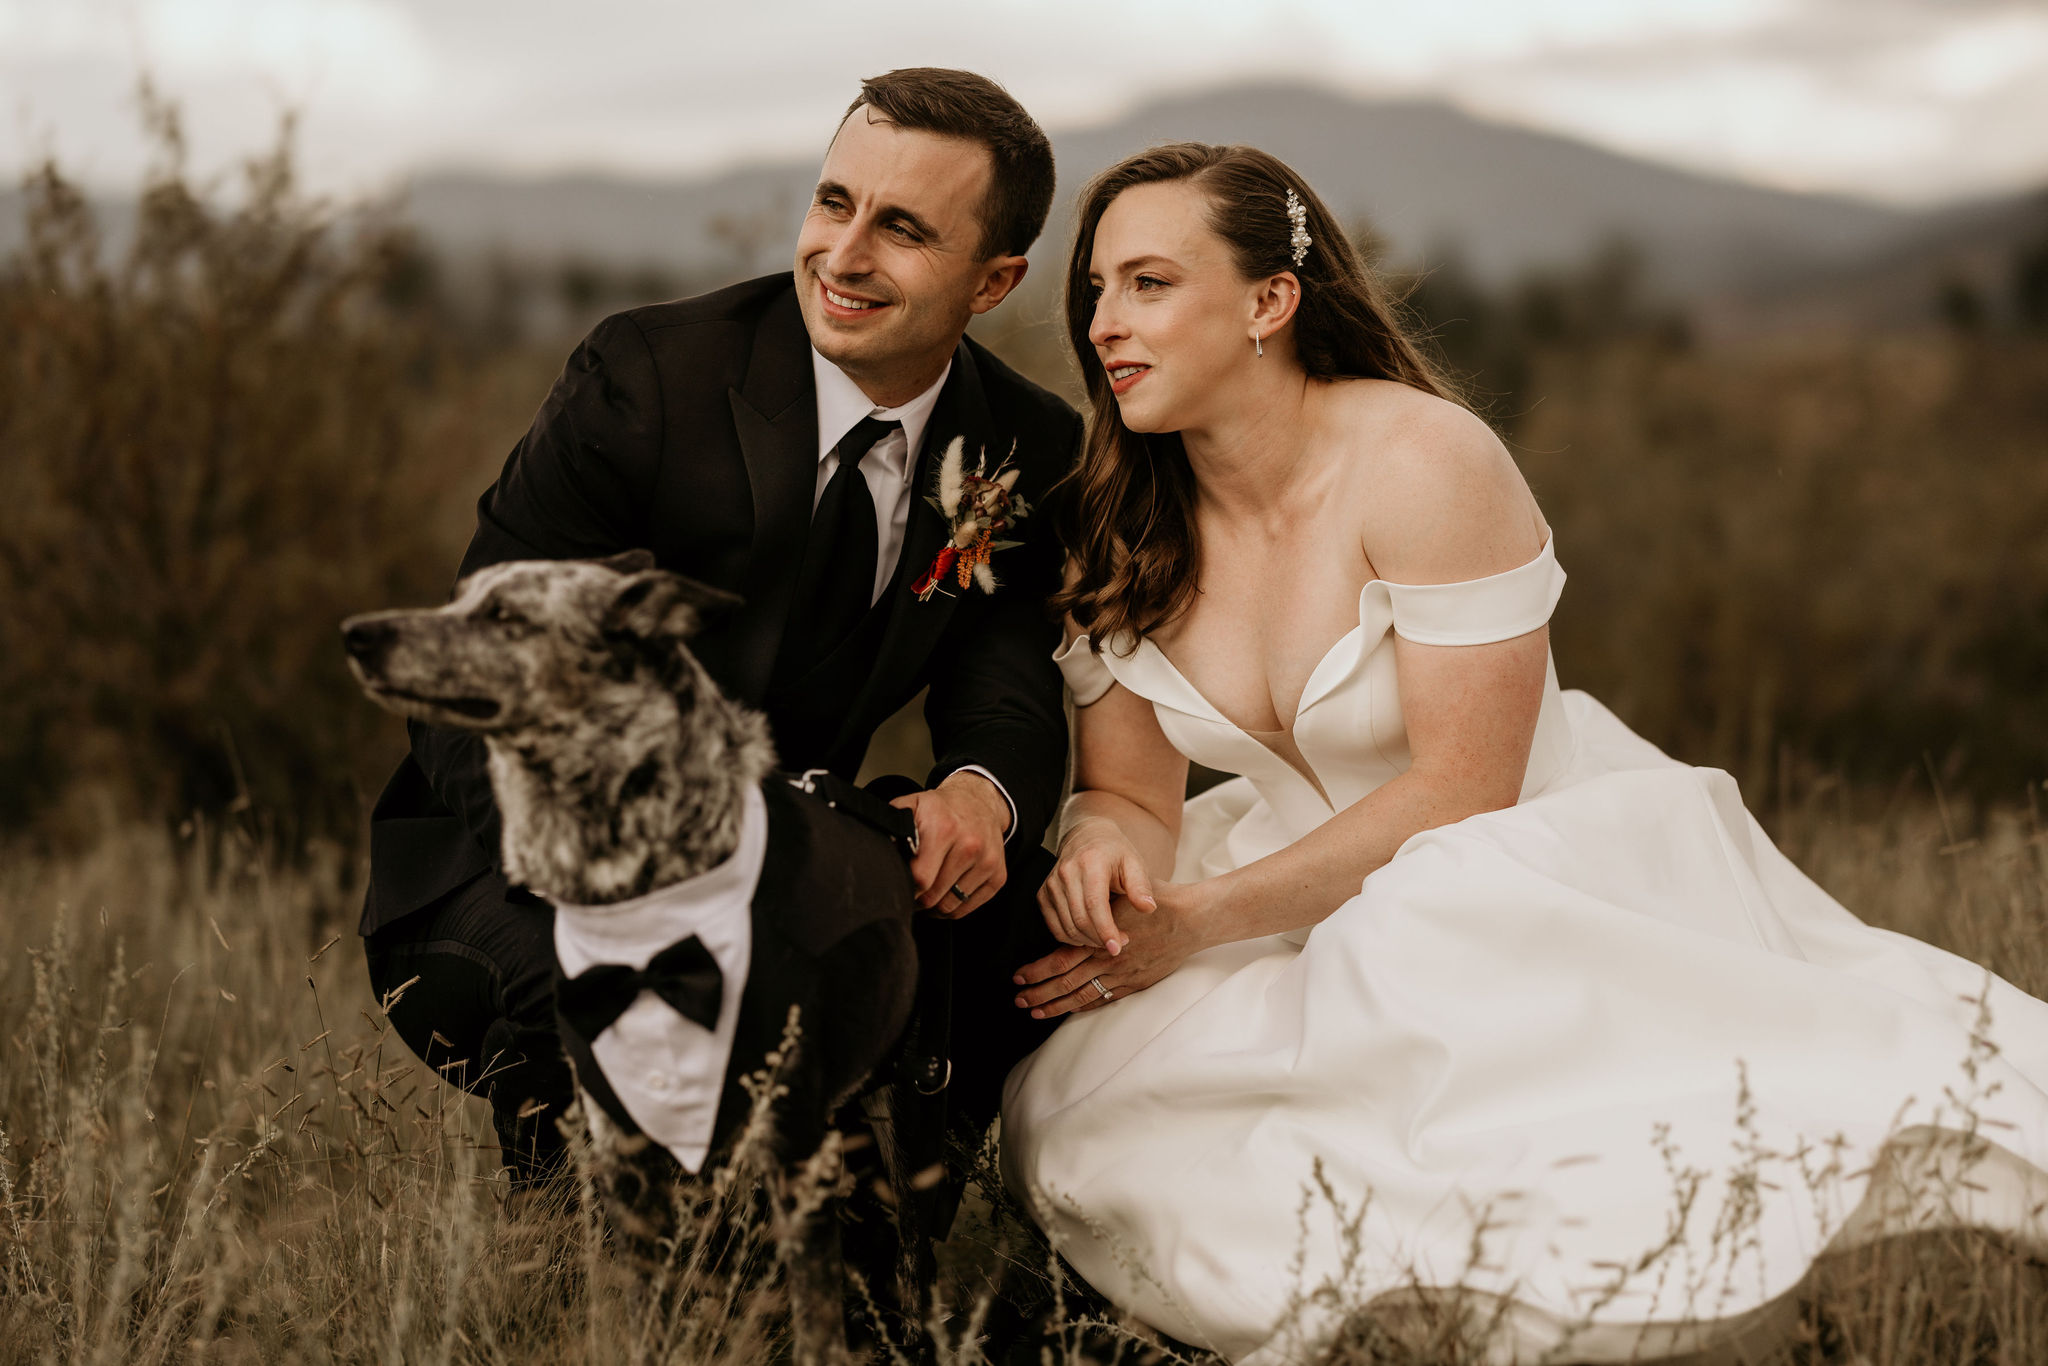 bride and groom pose with dog during wedding portraits.